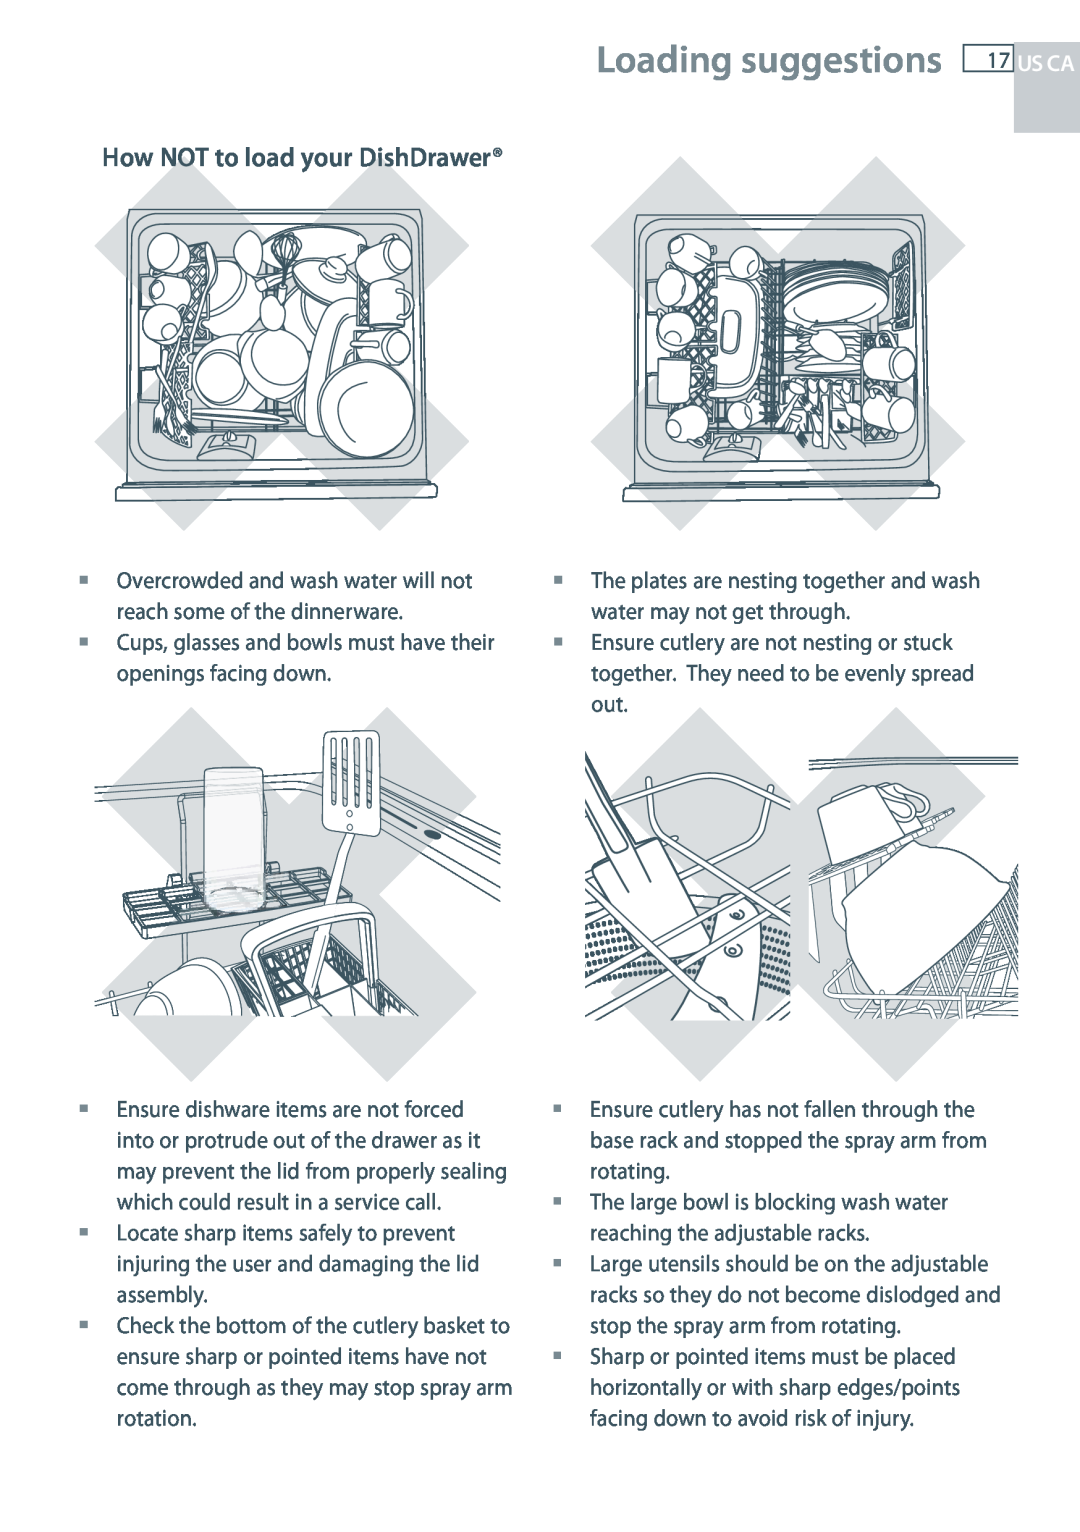 Fisher & Paykel DD24 manual Loading suggestions 17 US CA, How NOT to load your DishDrawer 